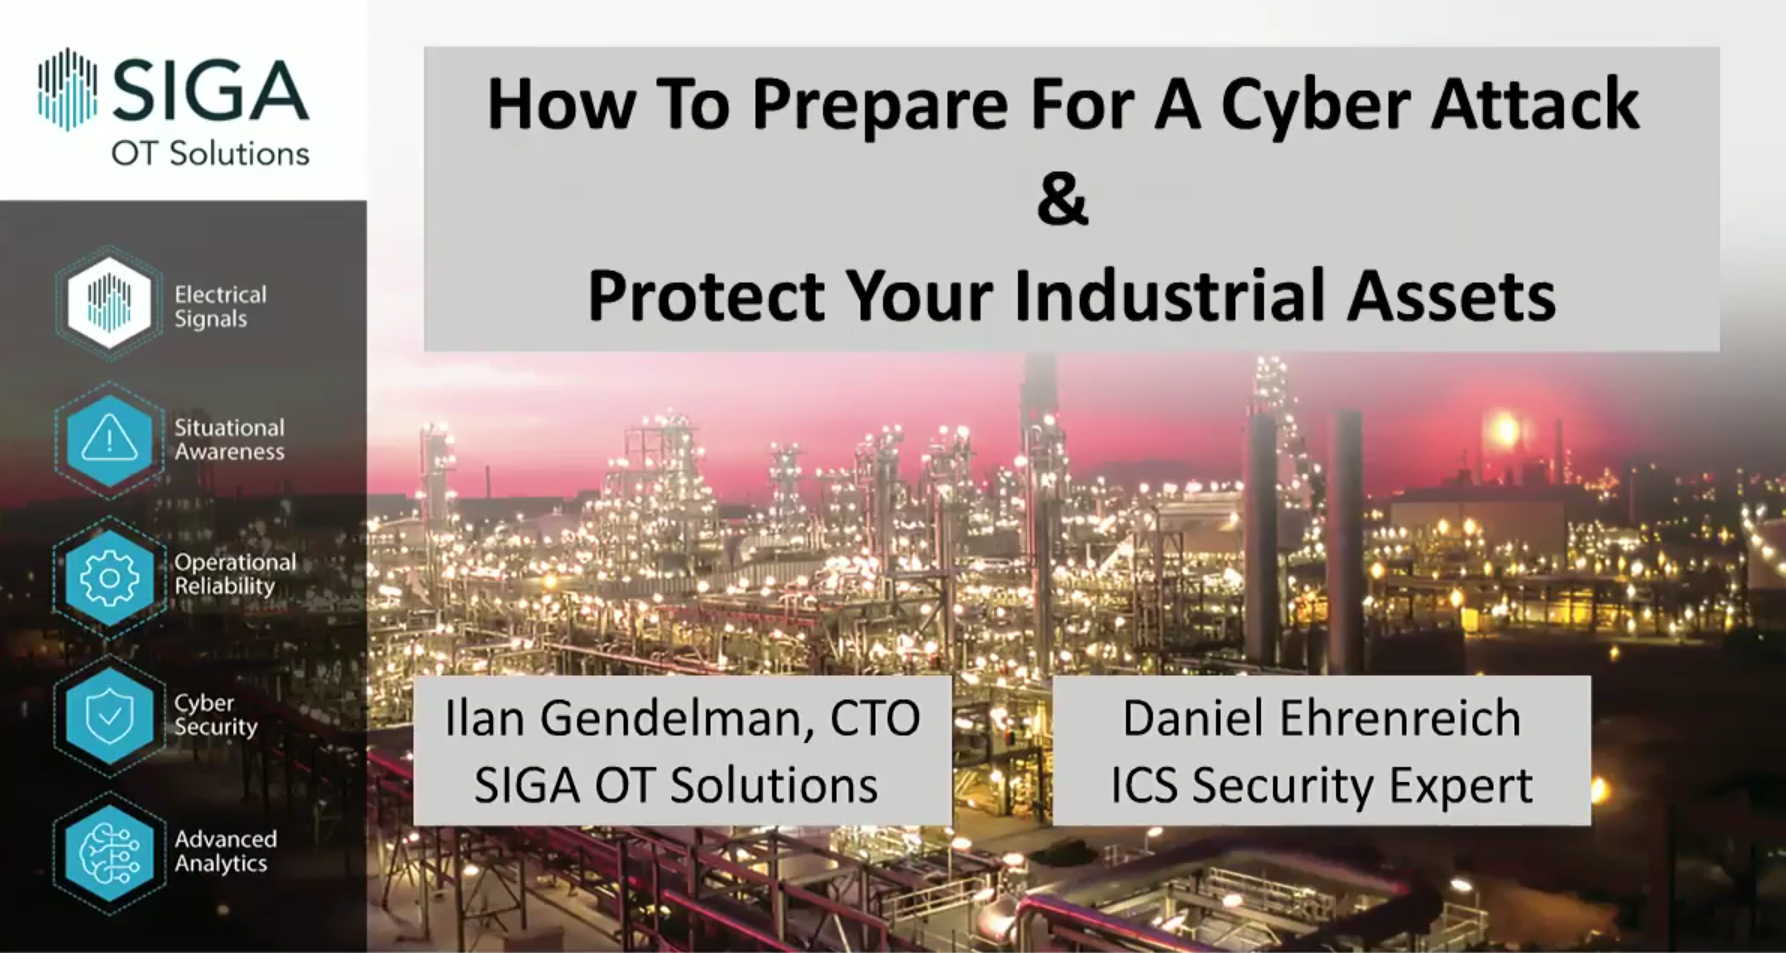 How to prepare for a cyber attack & protect your industrial assets